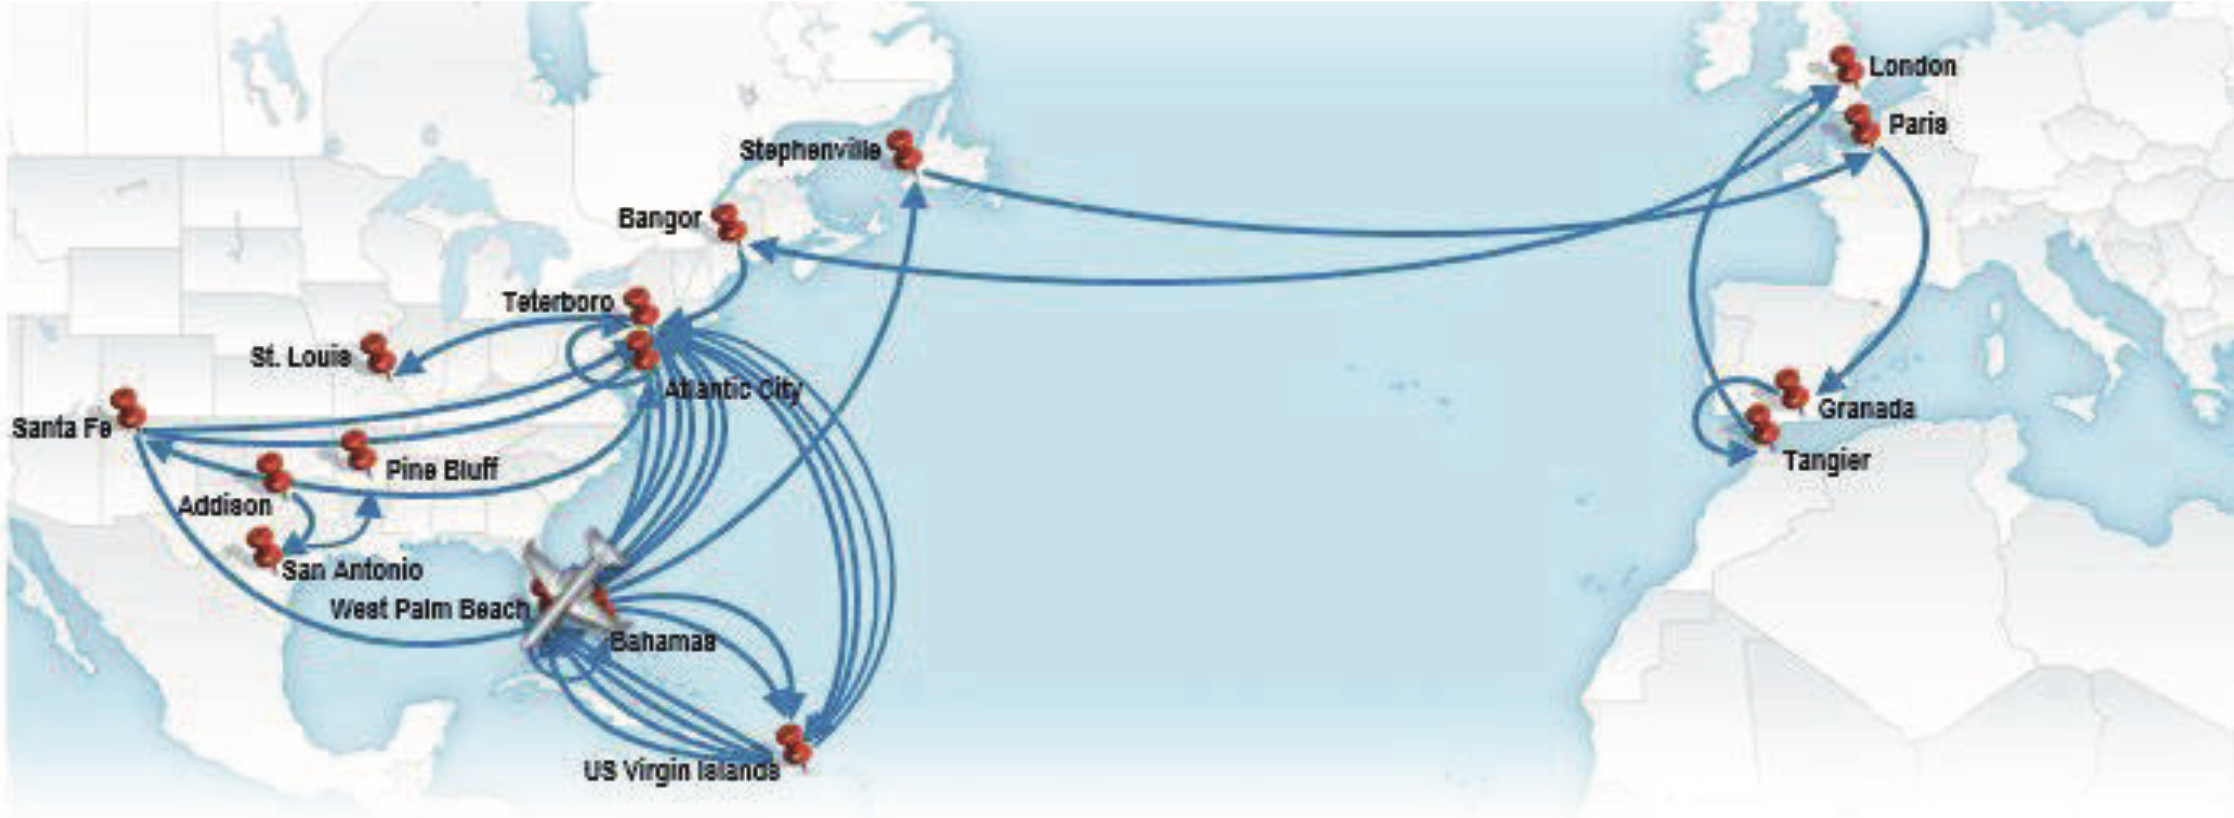 A graphic from Virginia Giuffre’蝉 lawsuit against Prince Andrew, showing stops in Epstein’蝉 alleged sex trafficking network